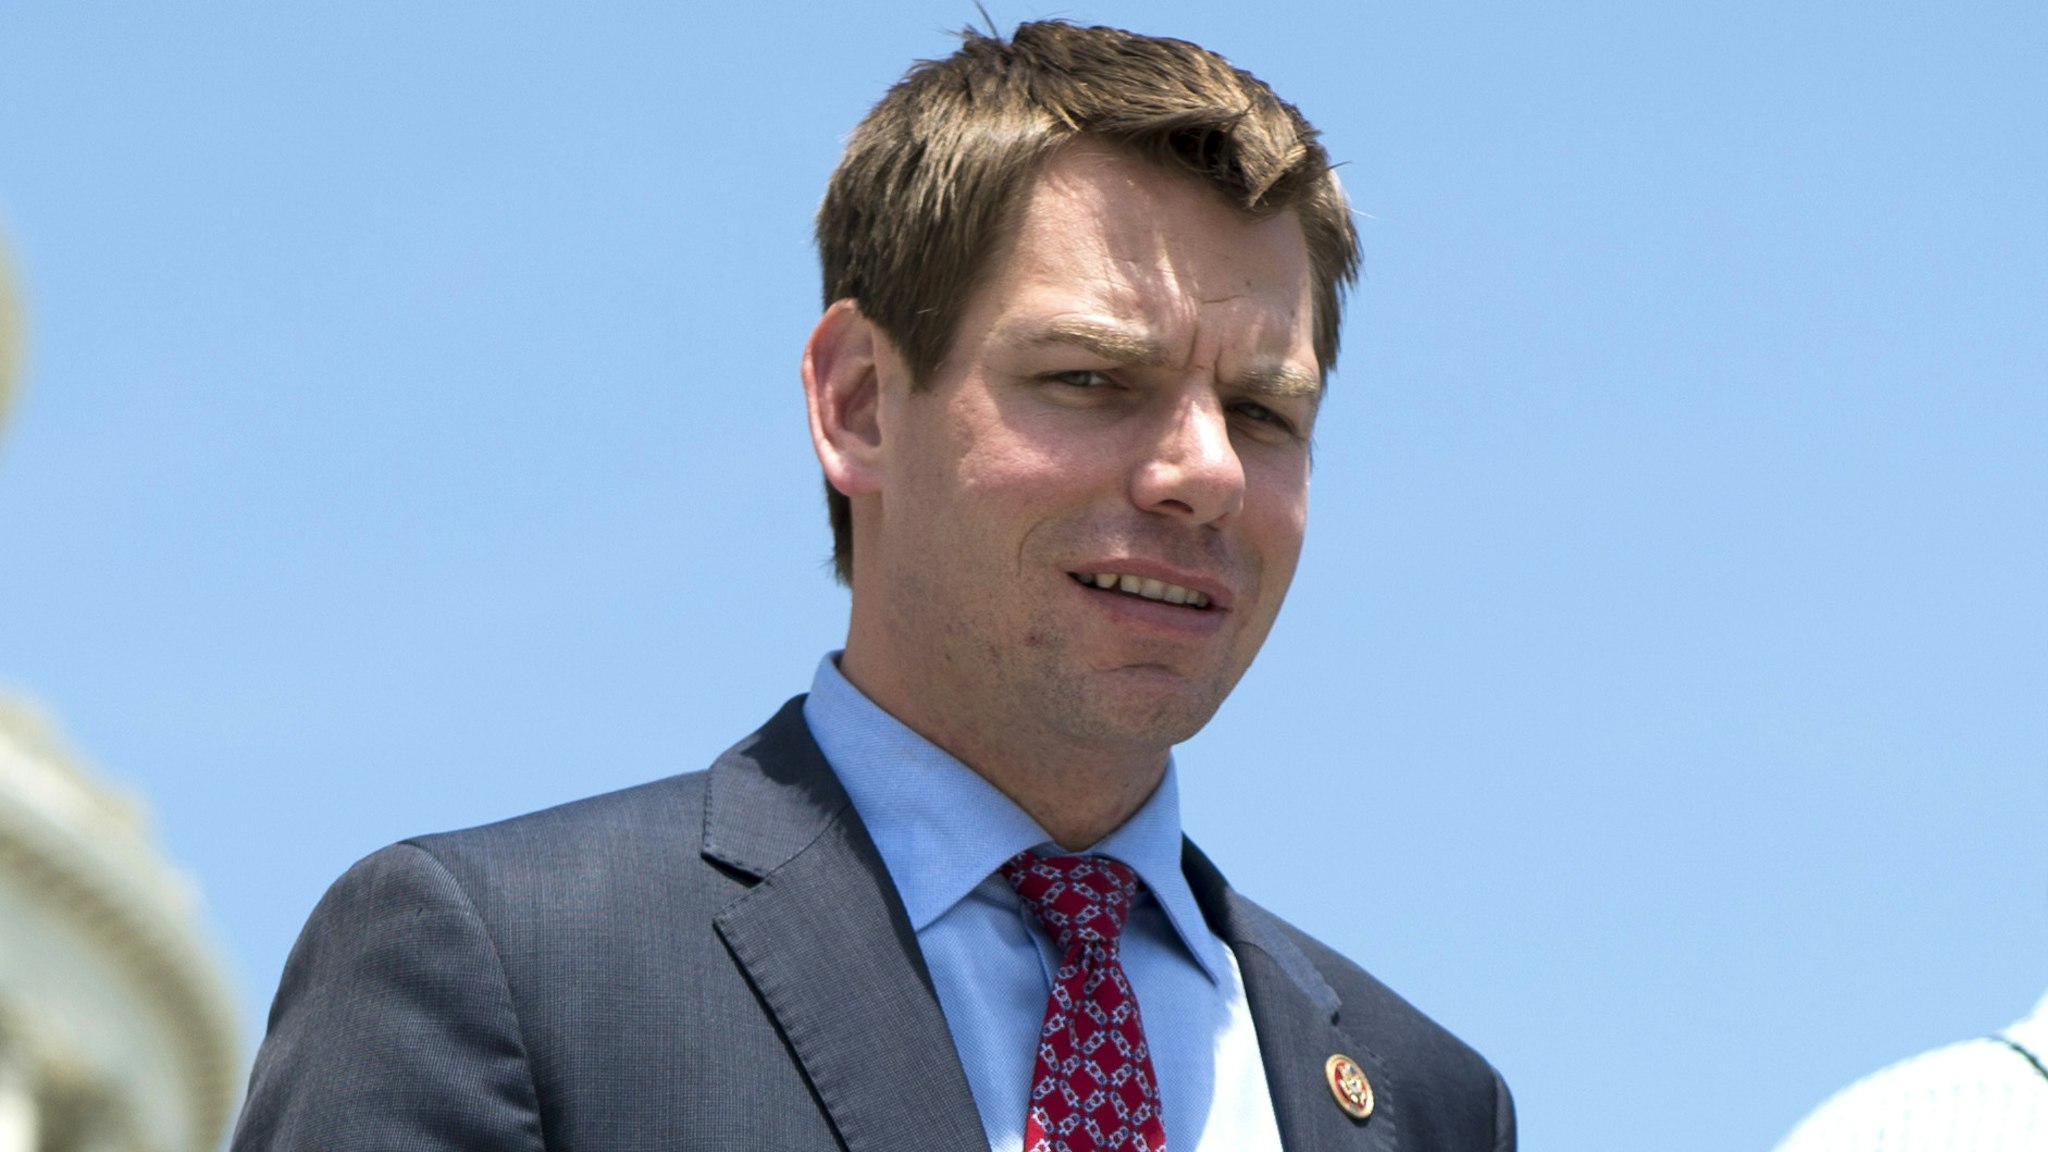 UNITED STATES - MAY 22: Rep. Eric Swalwell, D-Calif., walks down the House steps following a vote on Thursday, may 22, 2014.